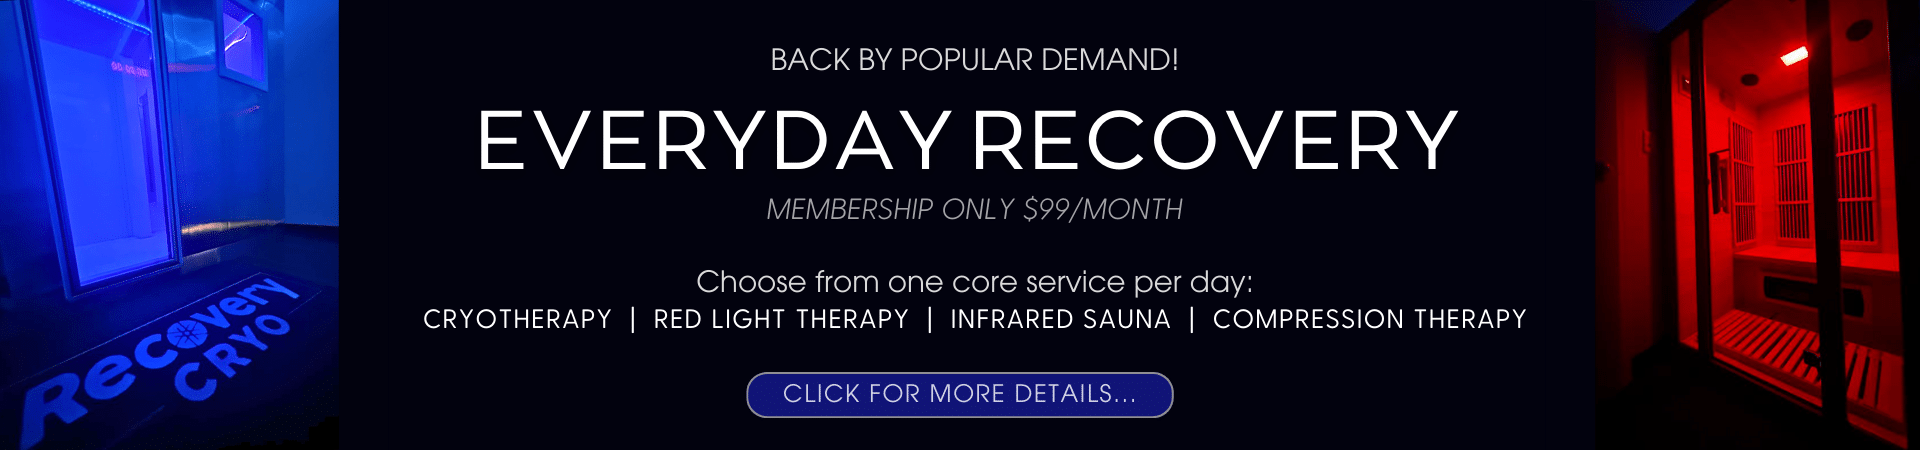 Everyday Recovery Membership is back! Only $99/month!